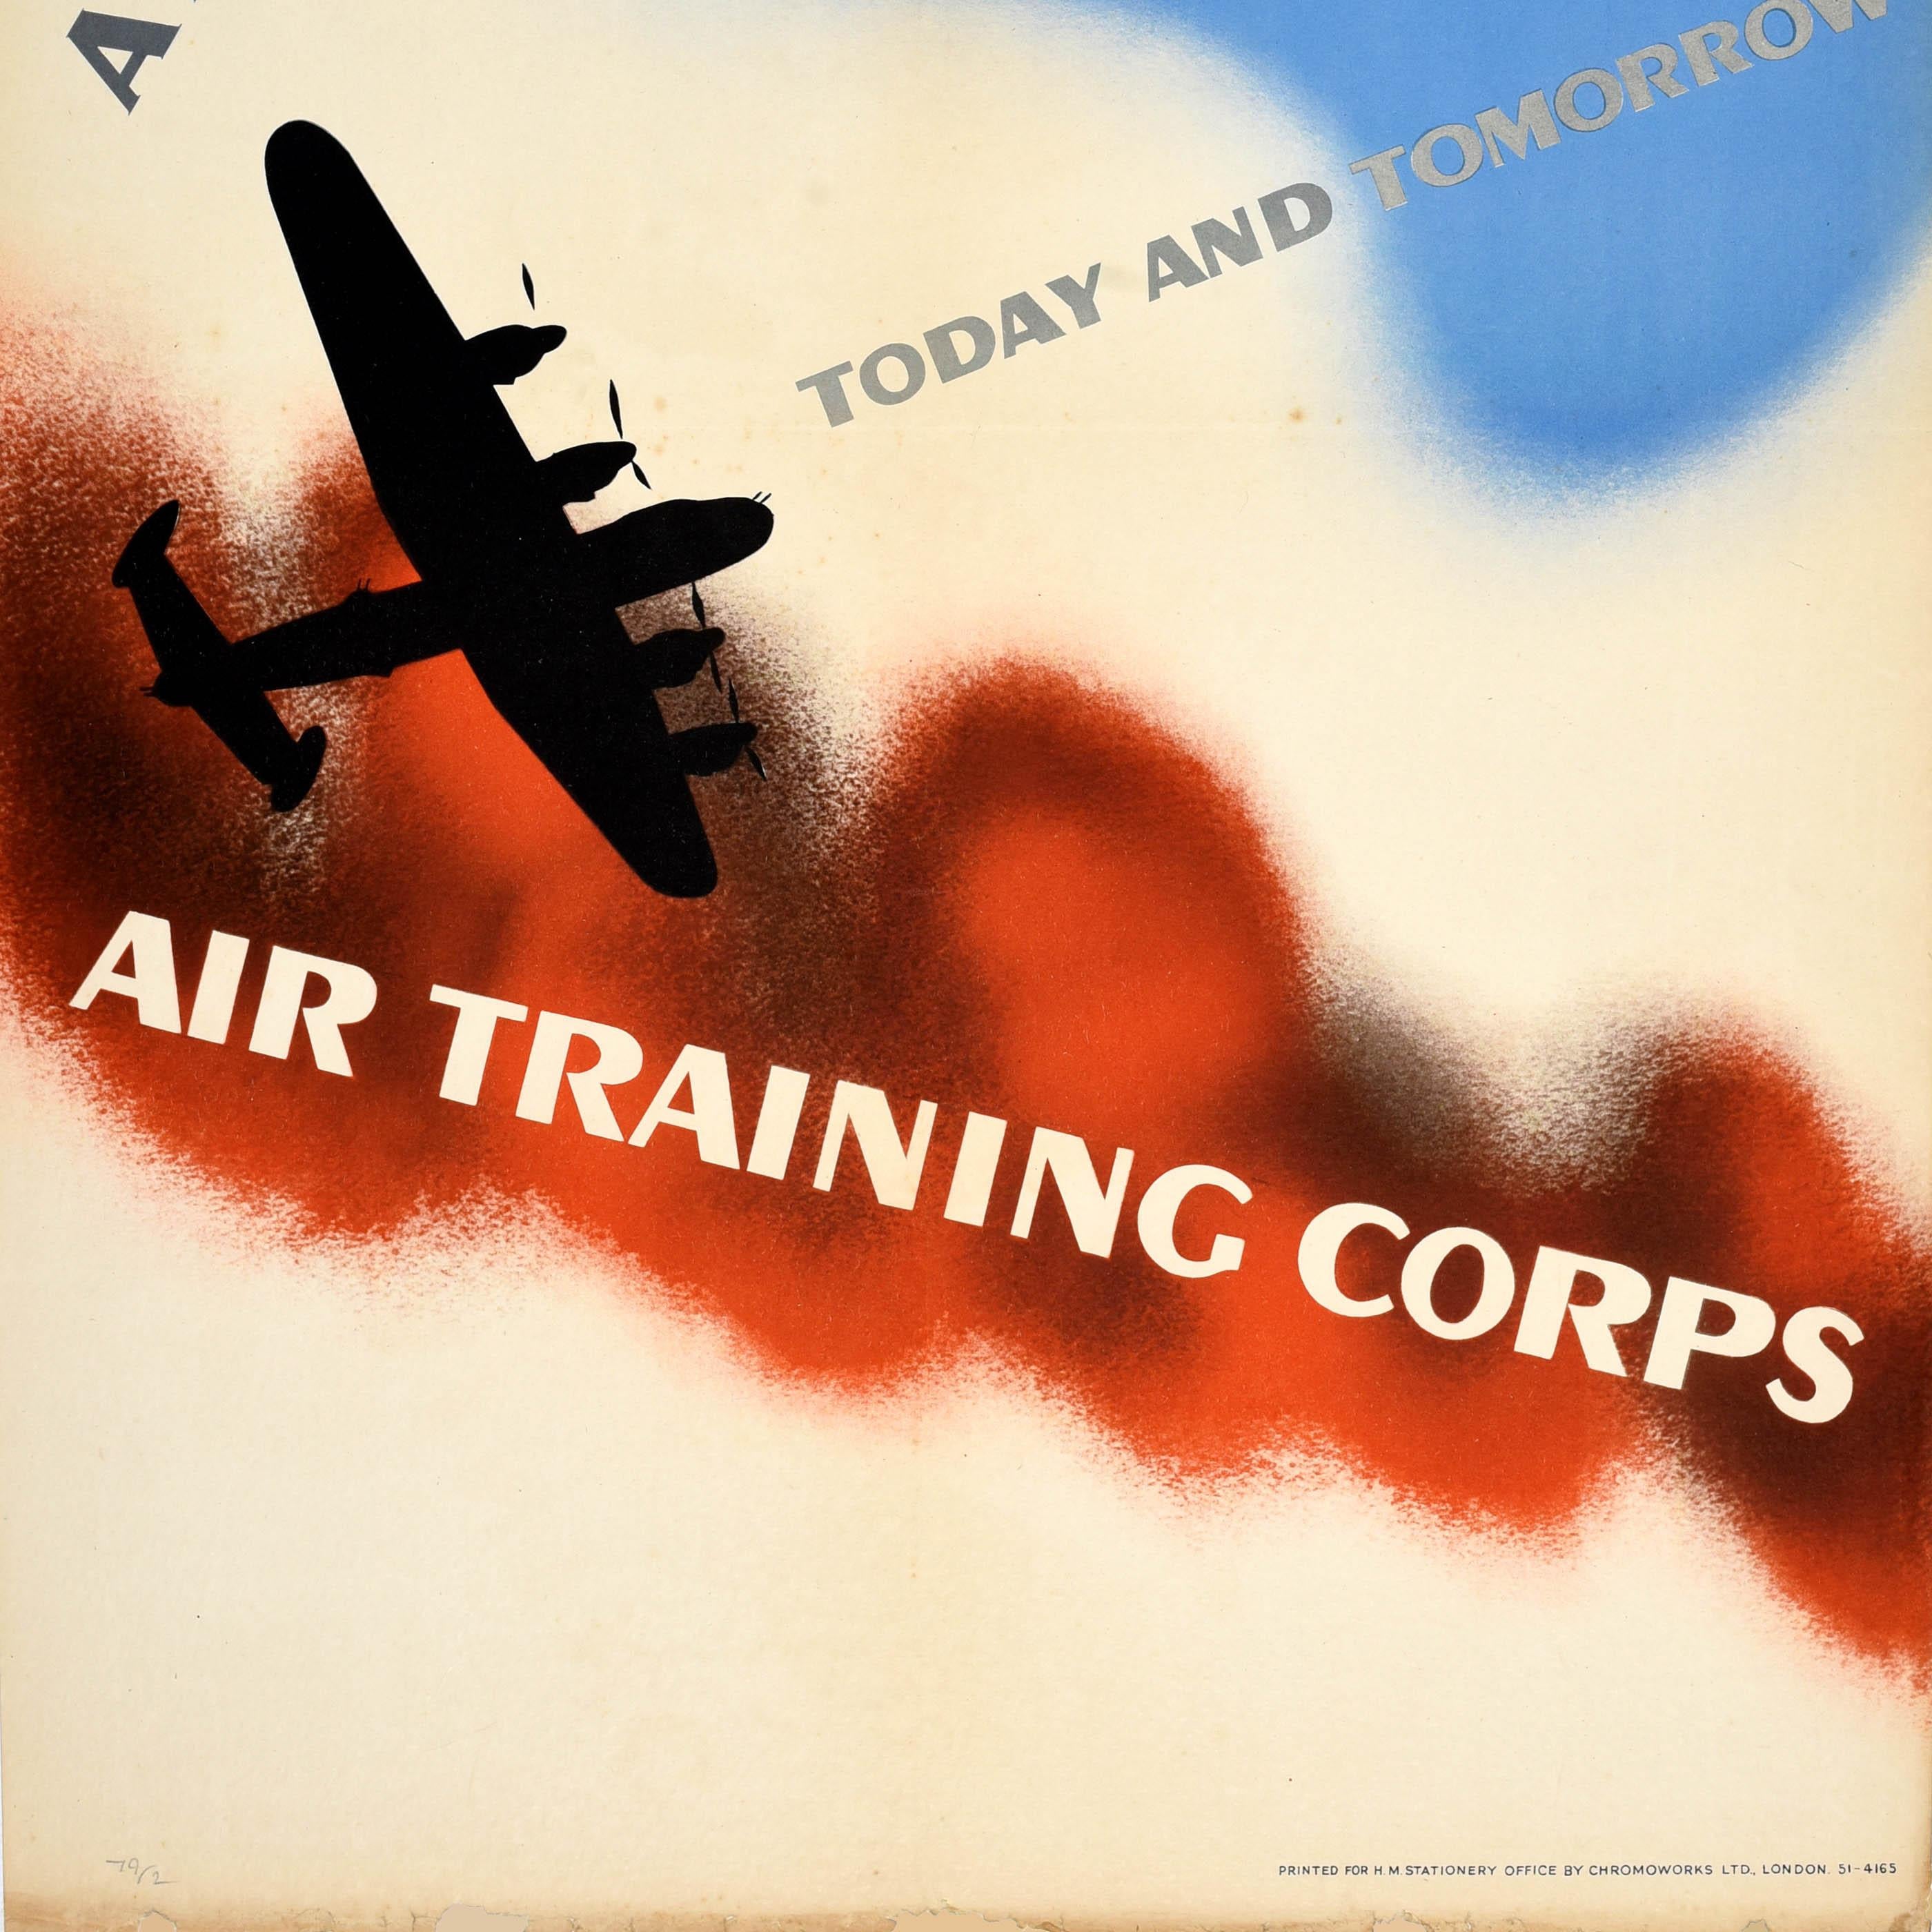 Original vintage RAF Royal Air Force recruitment poster for the Air Training Corps - Air Training Today and Tomorrow - featuring artwork by Jonathan Foss (1910-1974) depicting a silhouette of a World War Two bomber plane on a red background and a